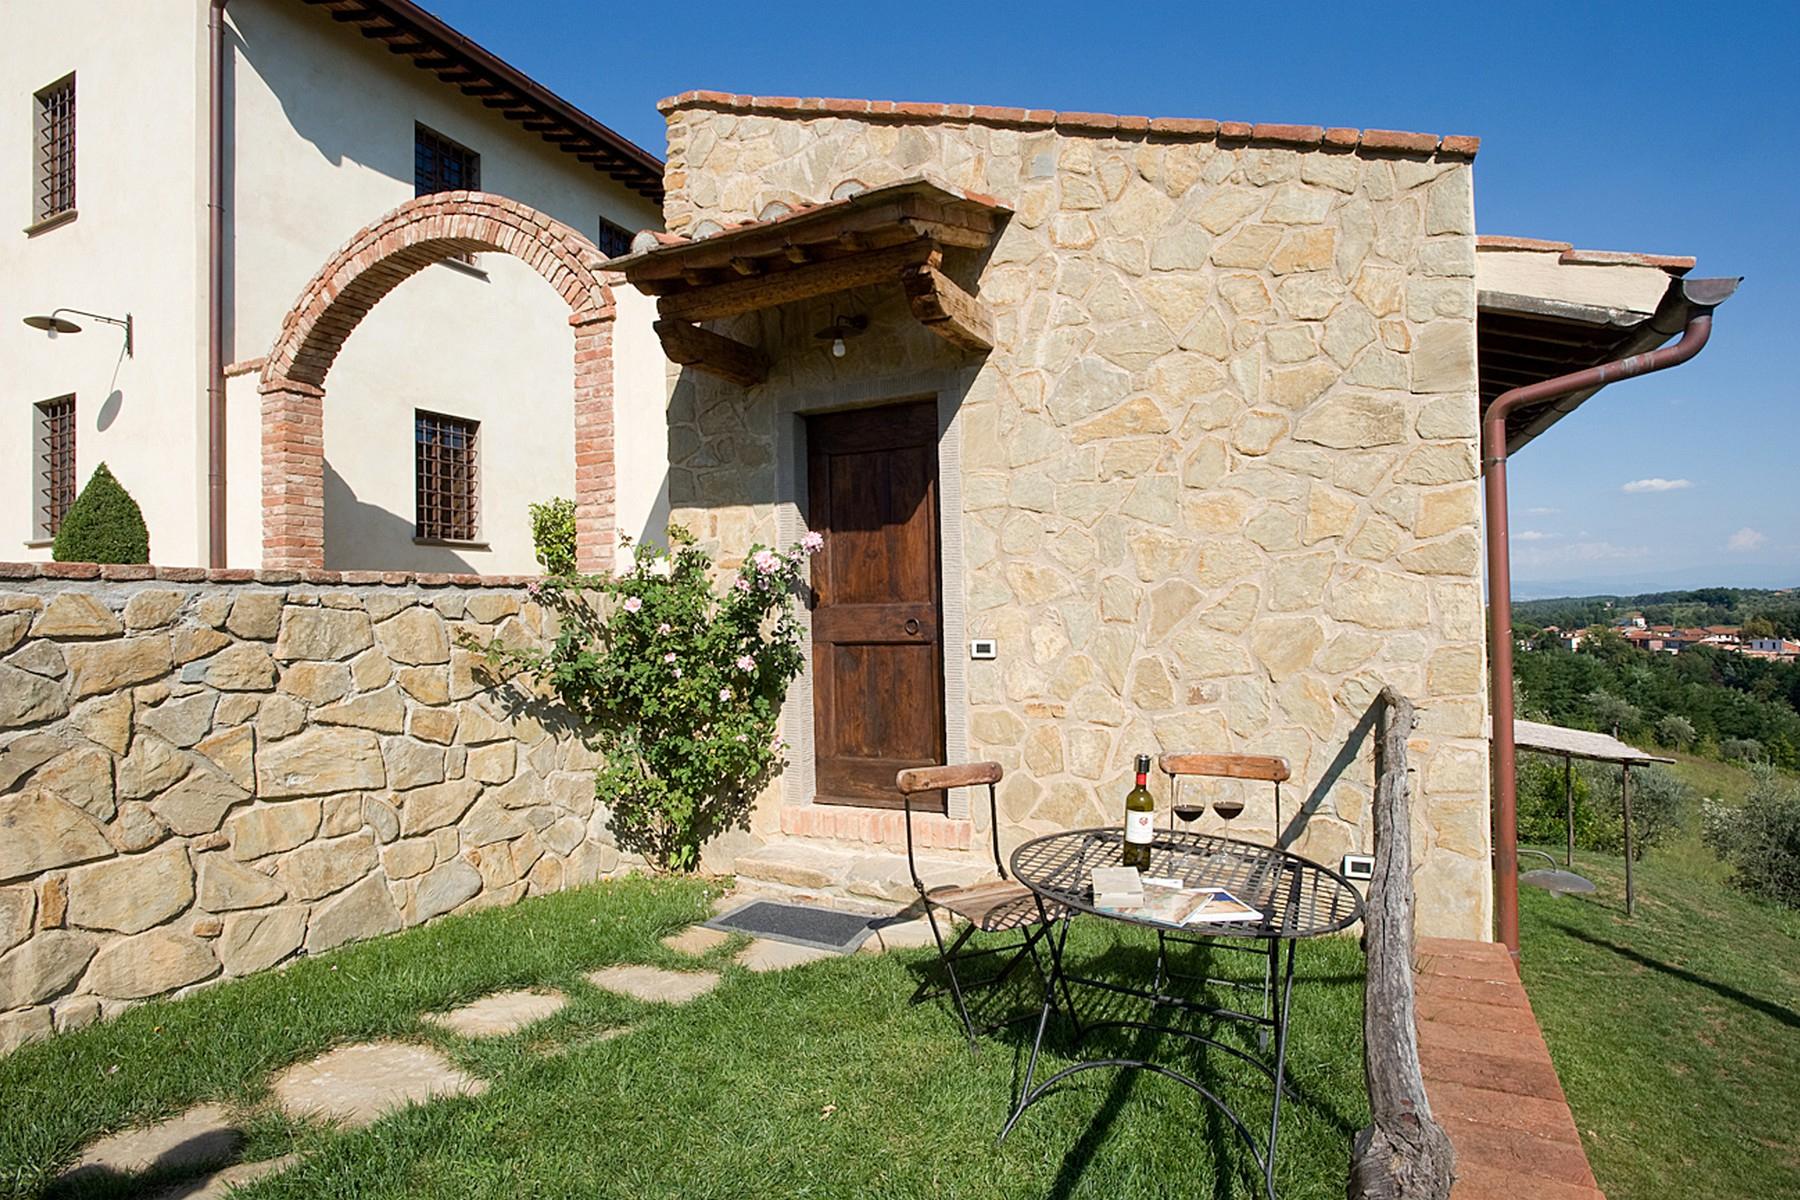 Farmhouse for sale in the Tuscan hills - 19